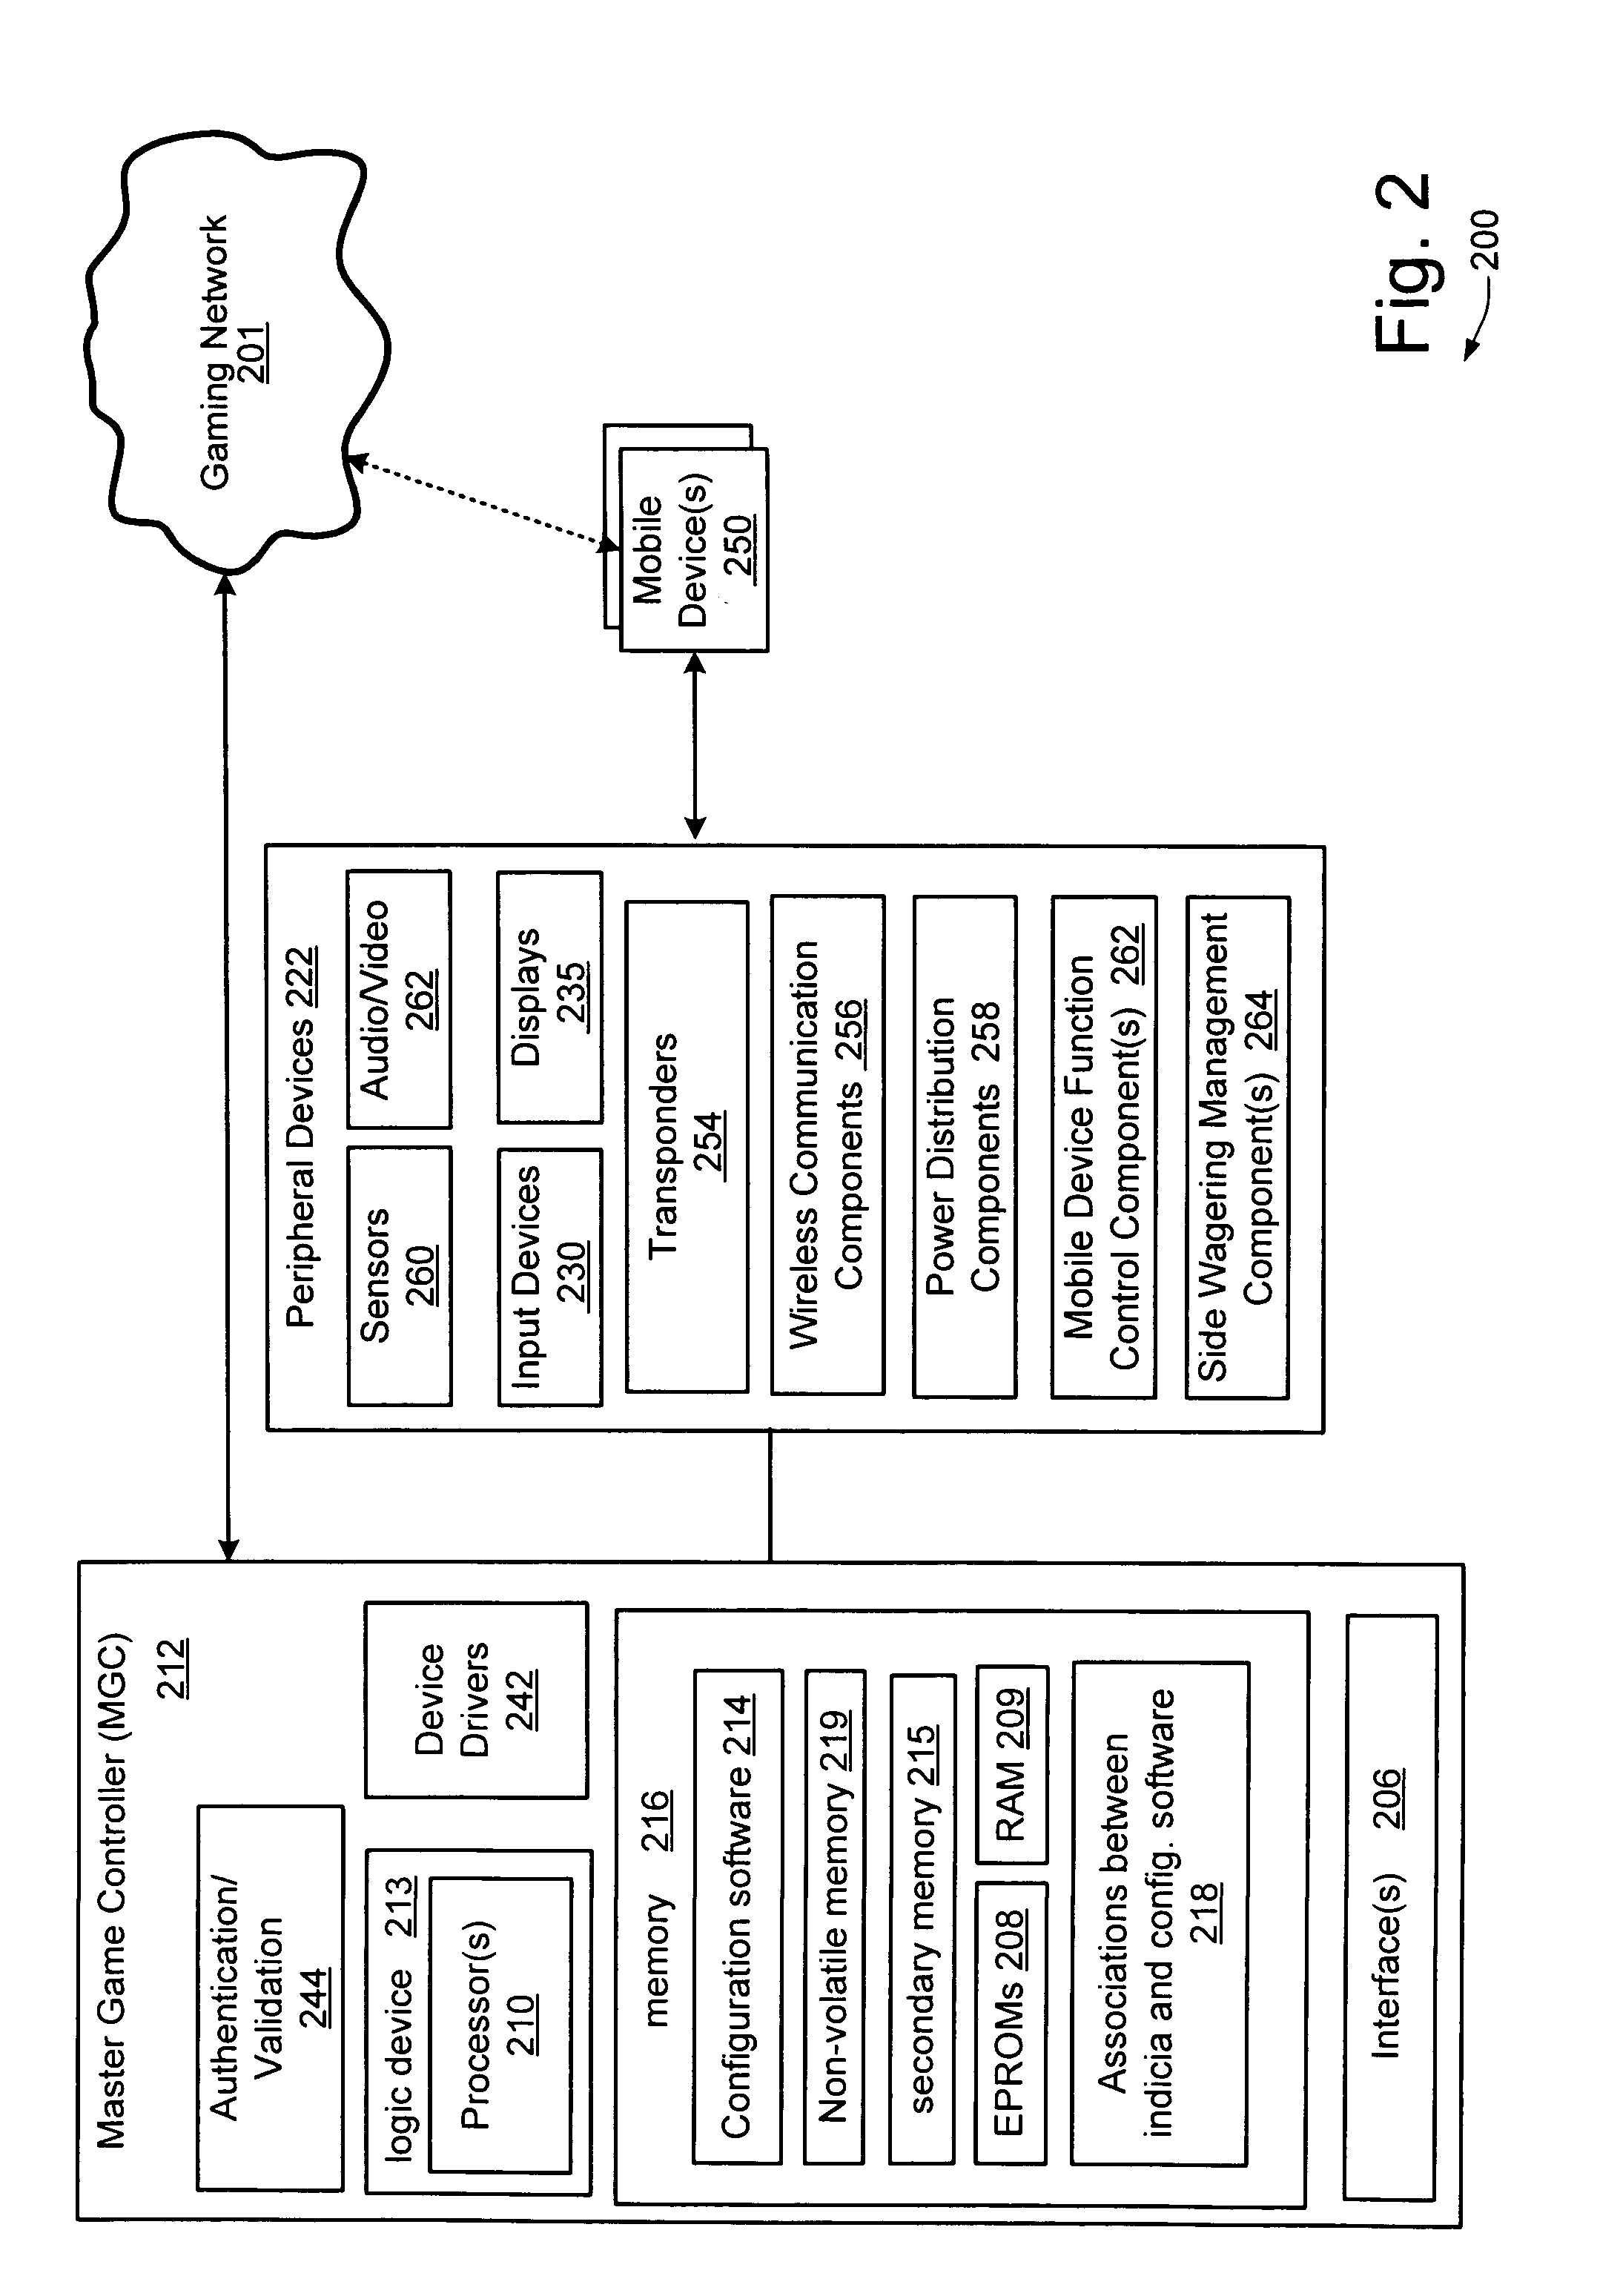 Dynamic side wagering system for use with electronic gaming devices